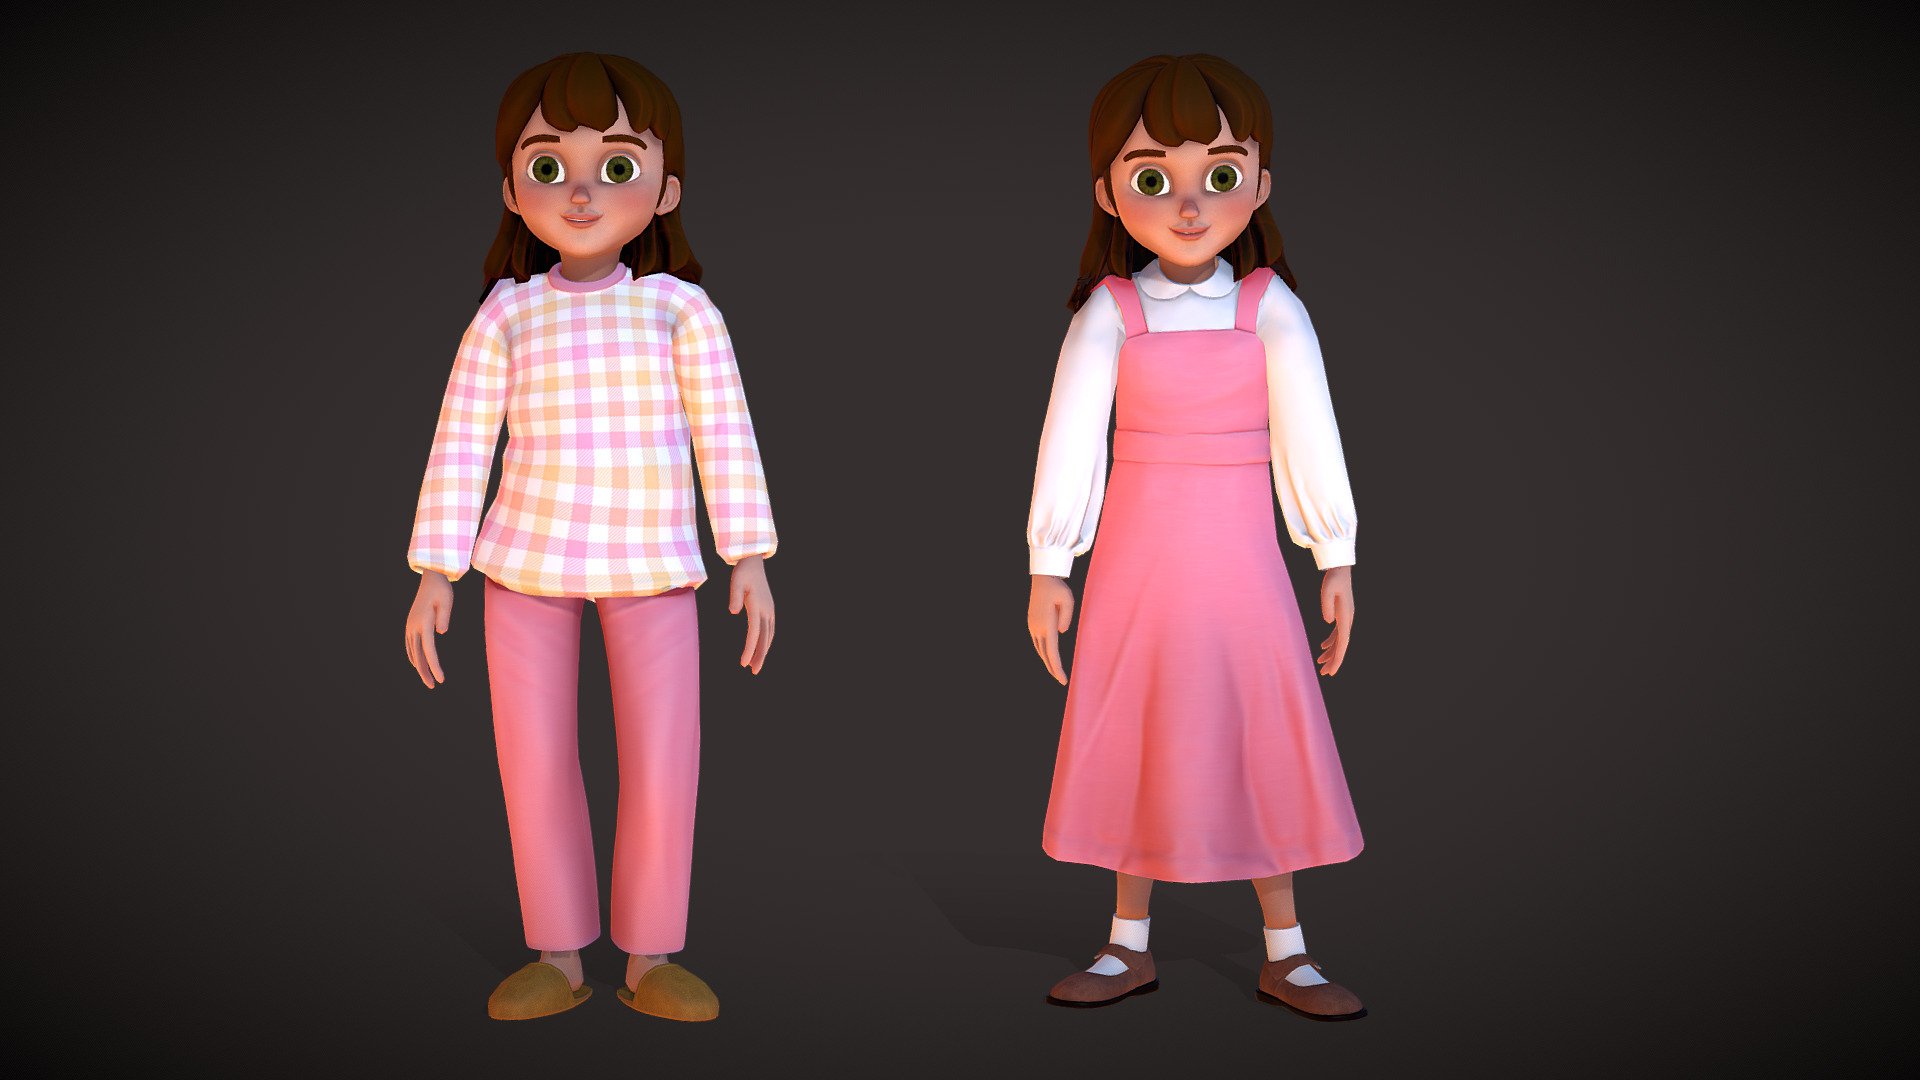 Arabi Girl character made as a game-ready model in two versions, one with a school uniform and the other with a pajama outfit 3d model